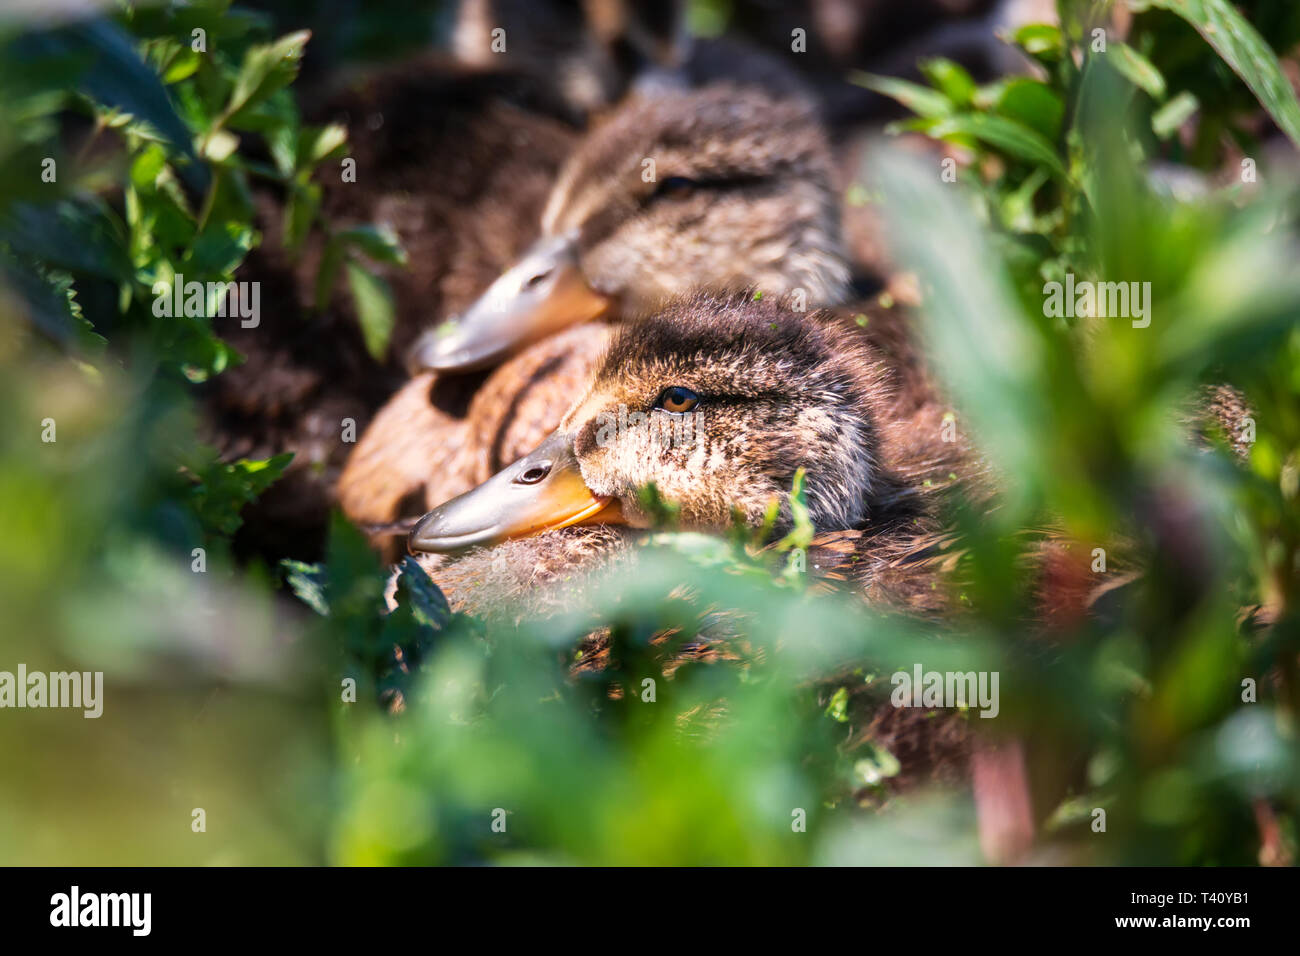 Several Ducklings Huddled Together in a Marsh. Color Image, Day Stock Photo